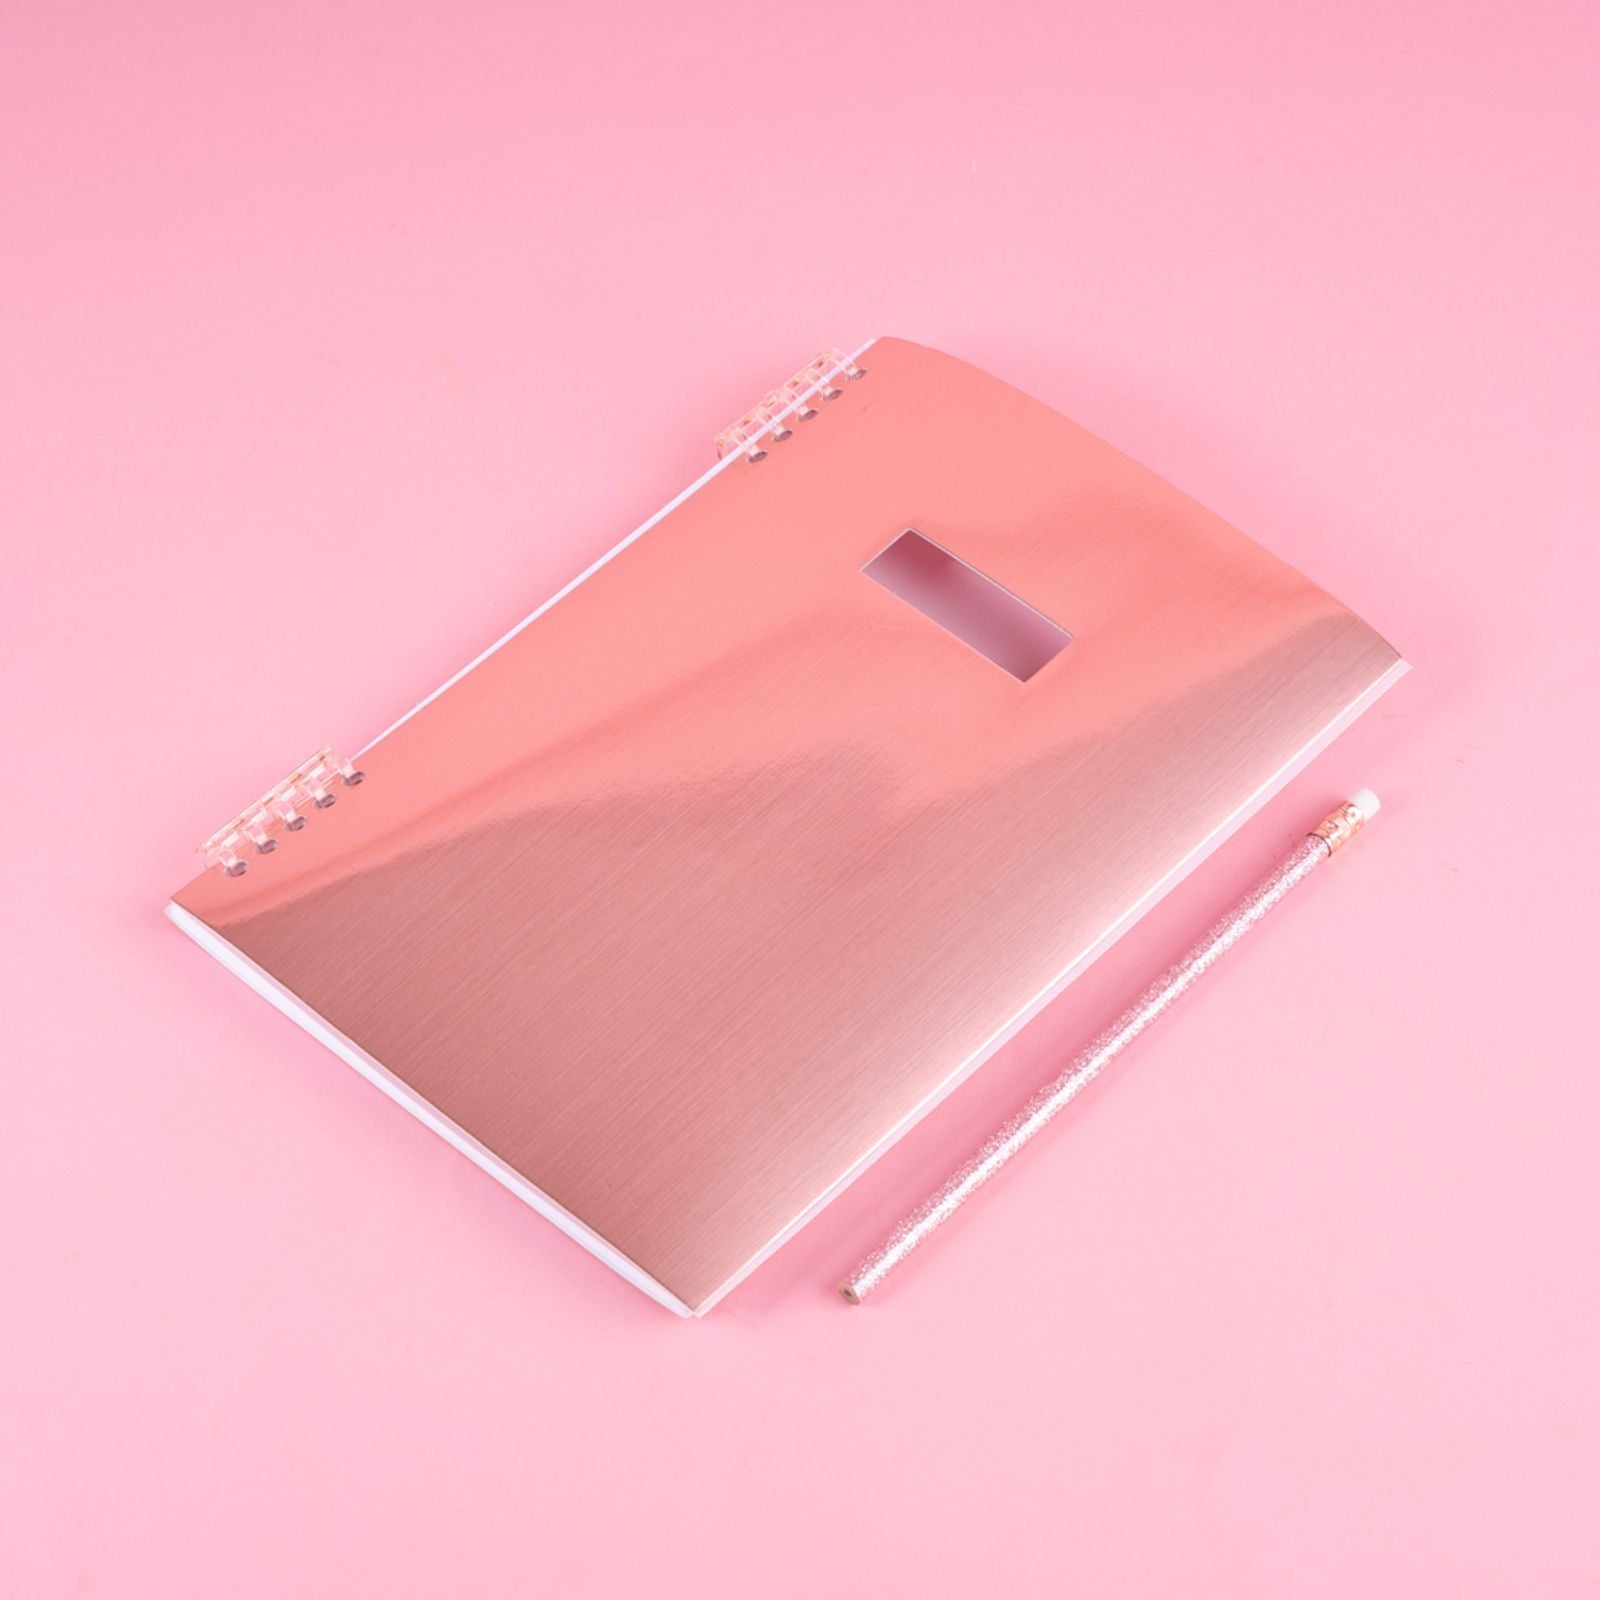 MINISO ROSE GOLD SERIES B5 LOOSE-LEAF WIRE-BOUND BOOK ( 64 SHEETS ) PDQ 2015307610102 STATIONERY & GIFT